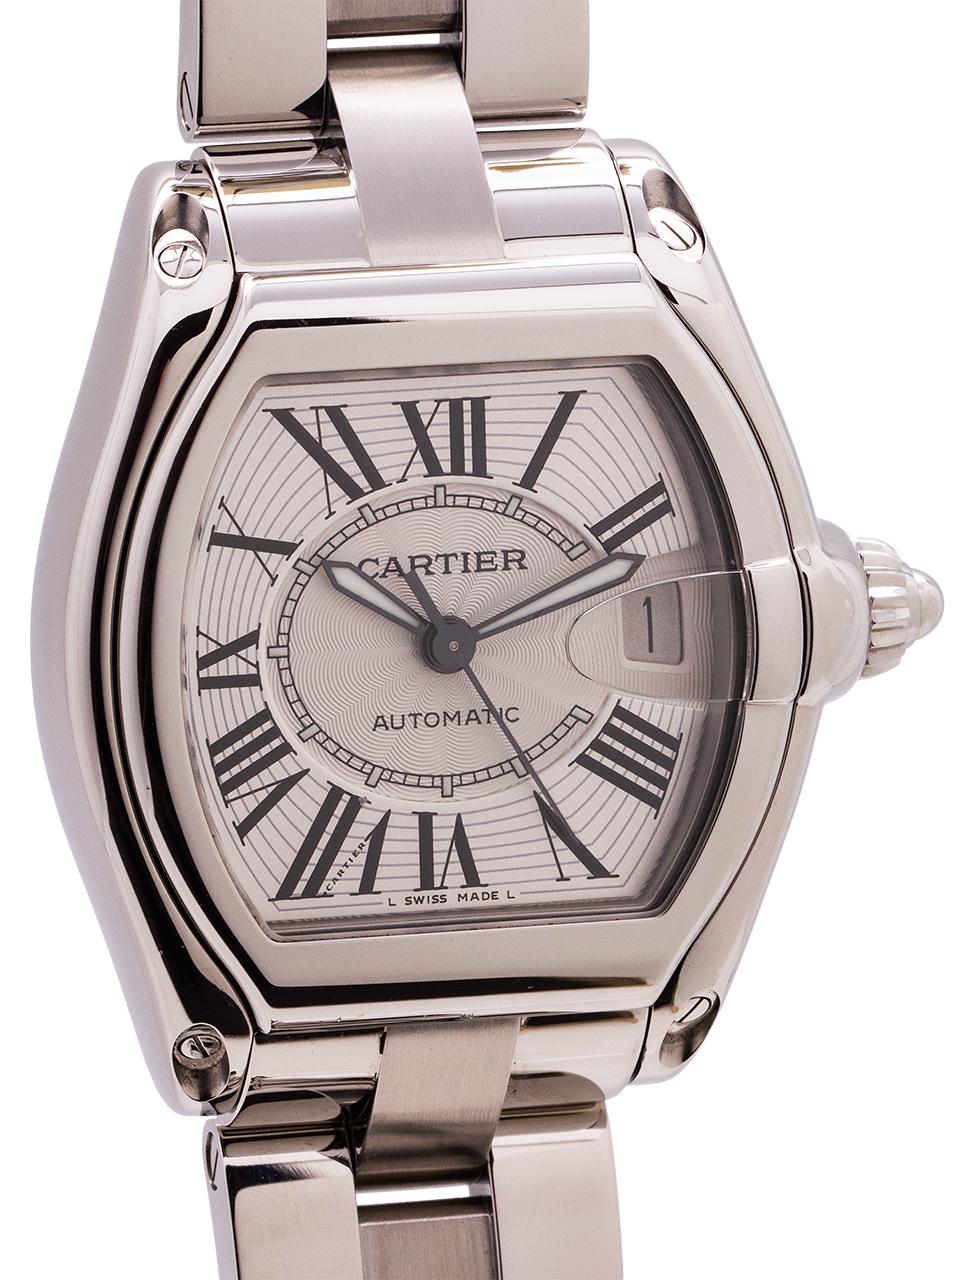 
Cartier Man’s Roadster automatic ref# 2510 circa 2000s. 38 x 44.5mm tonneau shaped stainless steel case with steel cabochon style screw down crown, matte silver textured dial with black stretch Roman numerals, and black outline kite shaped luminova